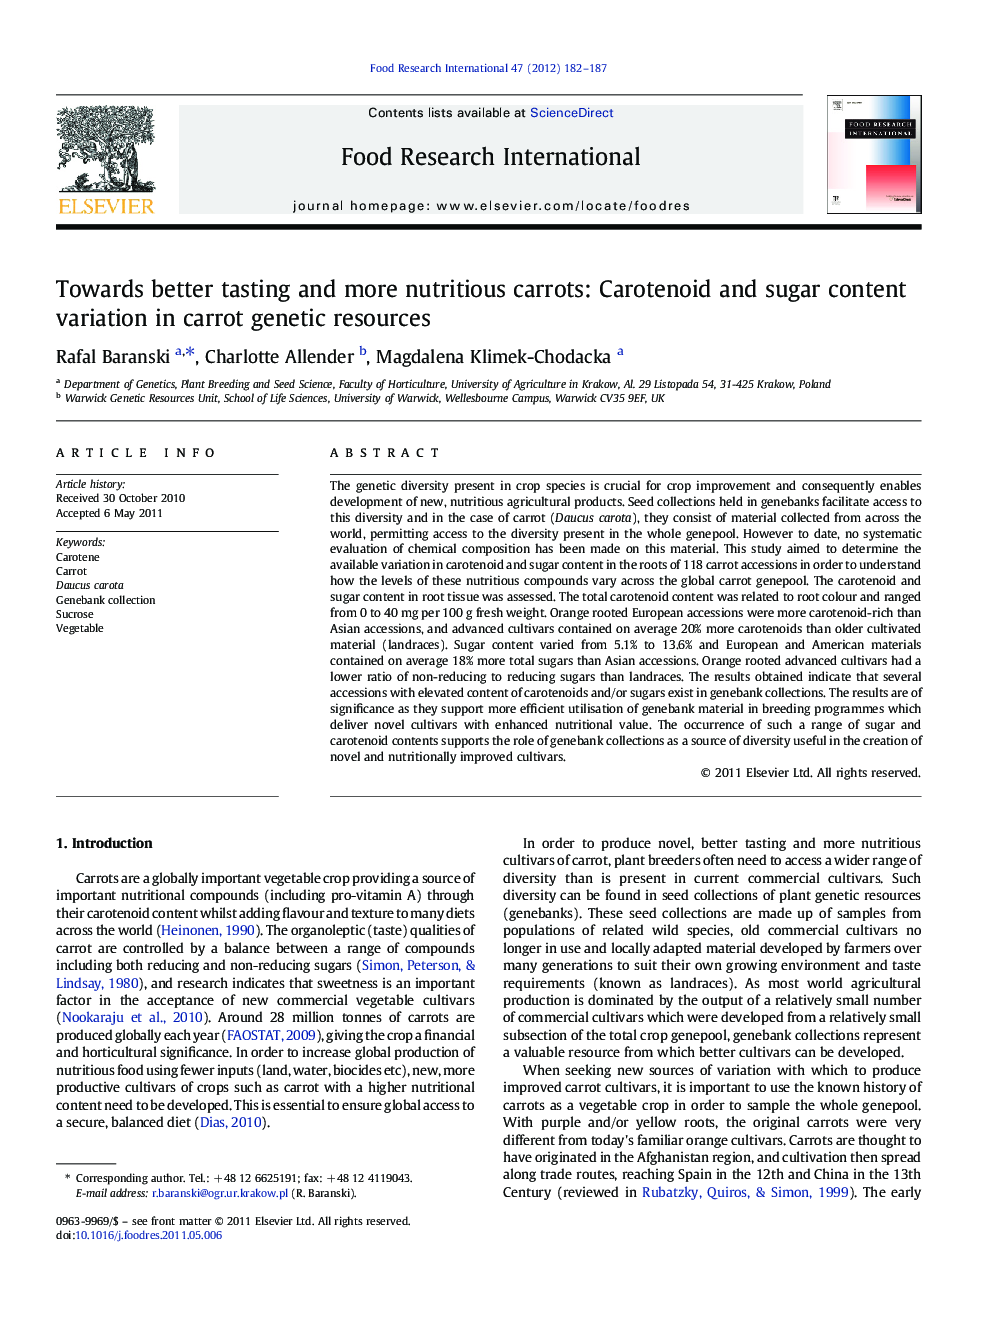 Towards better tasting and more nutritious carrots: Carotenoid and sugar content variation in carrot genetic resources